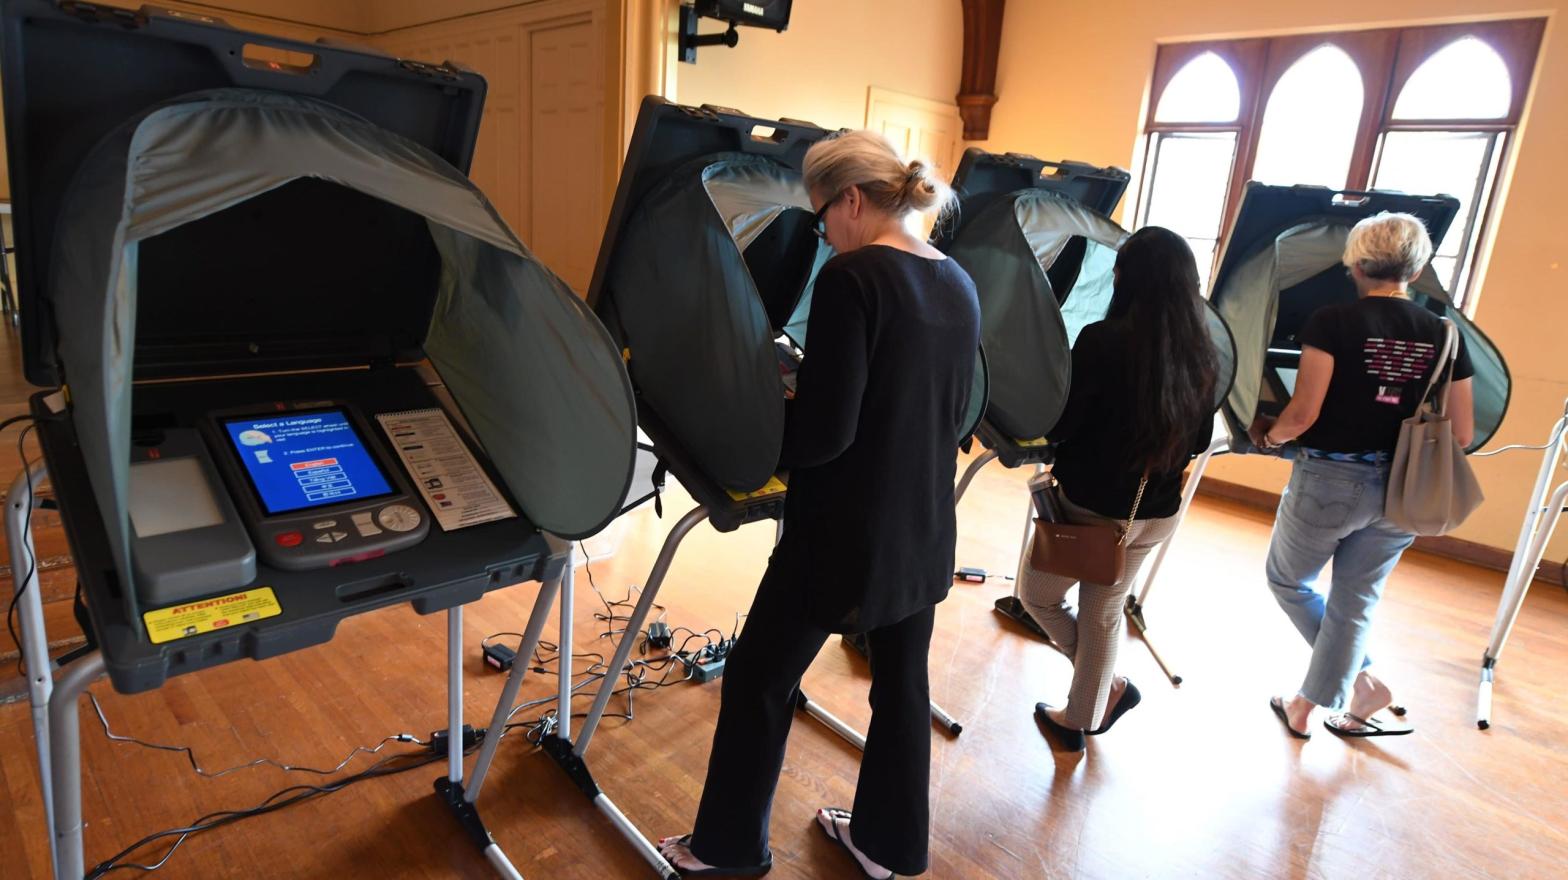 People use electronic voting machines to cast their ballot in the midterm elections at Neighbourhood Congregational Church in Laguna Beach, California on election day in 2018.  (Photo:  Robyn Beck, Getty Images)